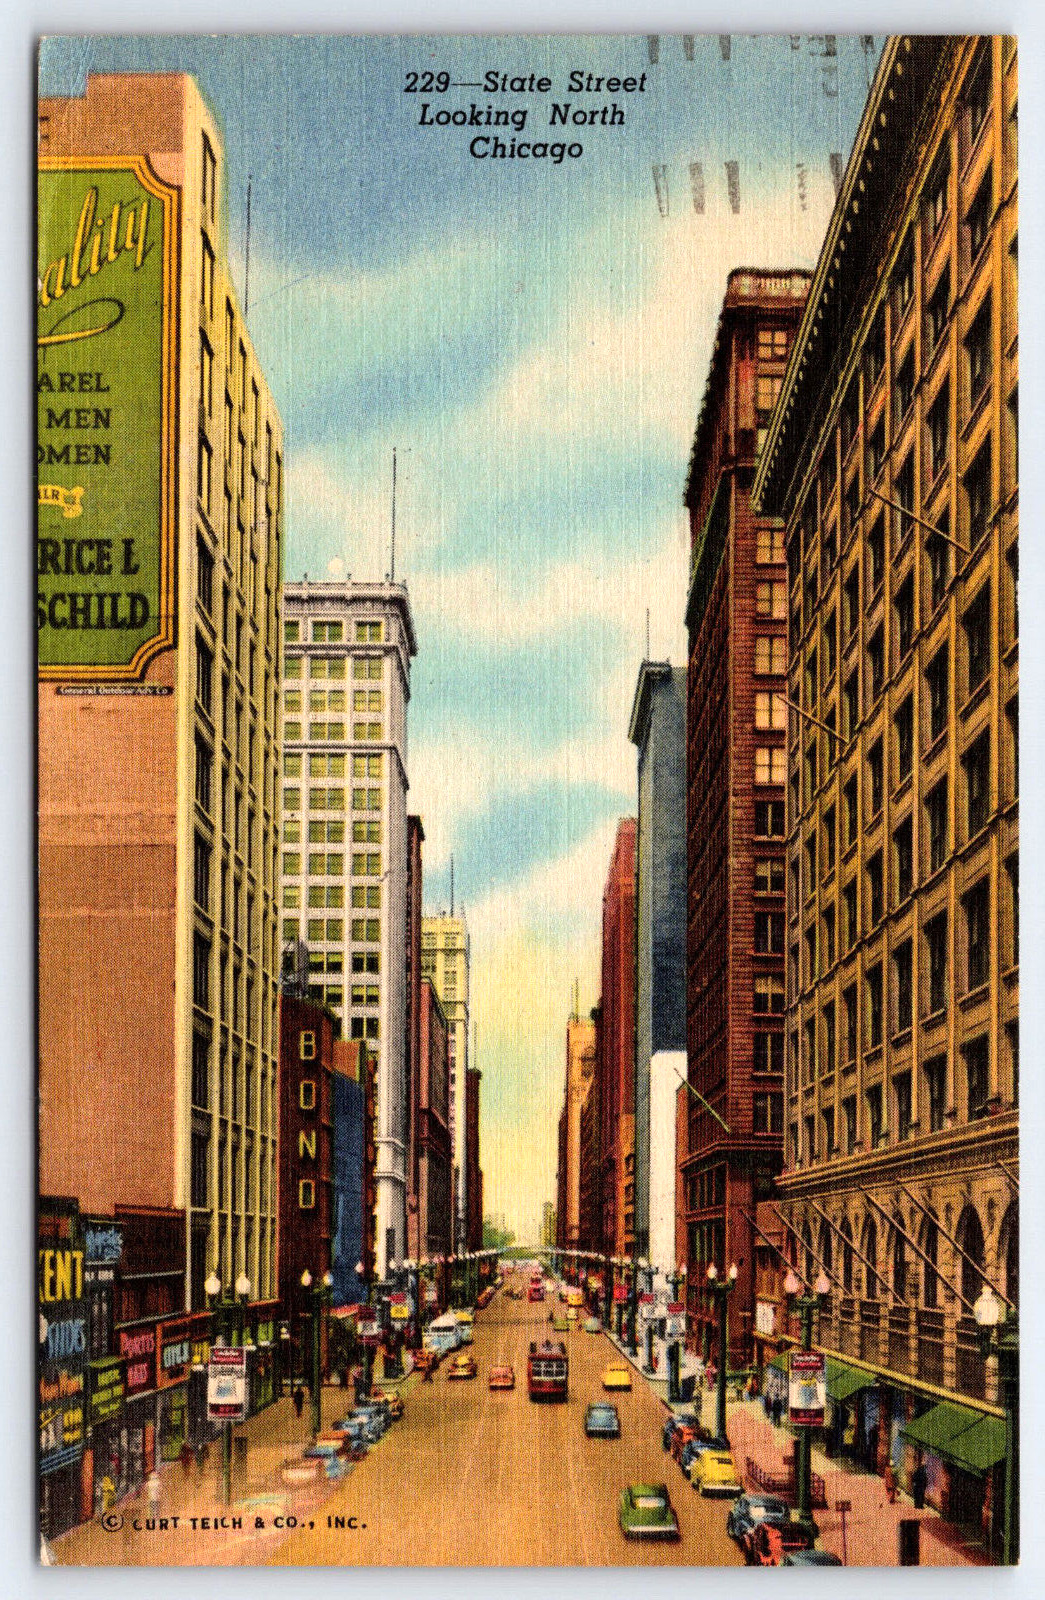 Chicago IL-Illinois, State Street, Buildings Cars Advertising, Vintage Postcard